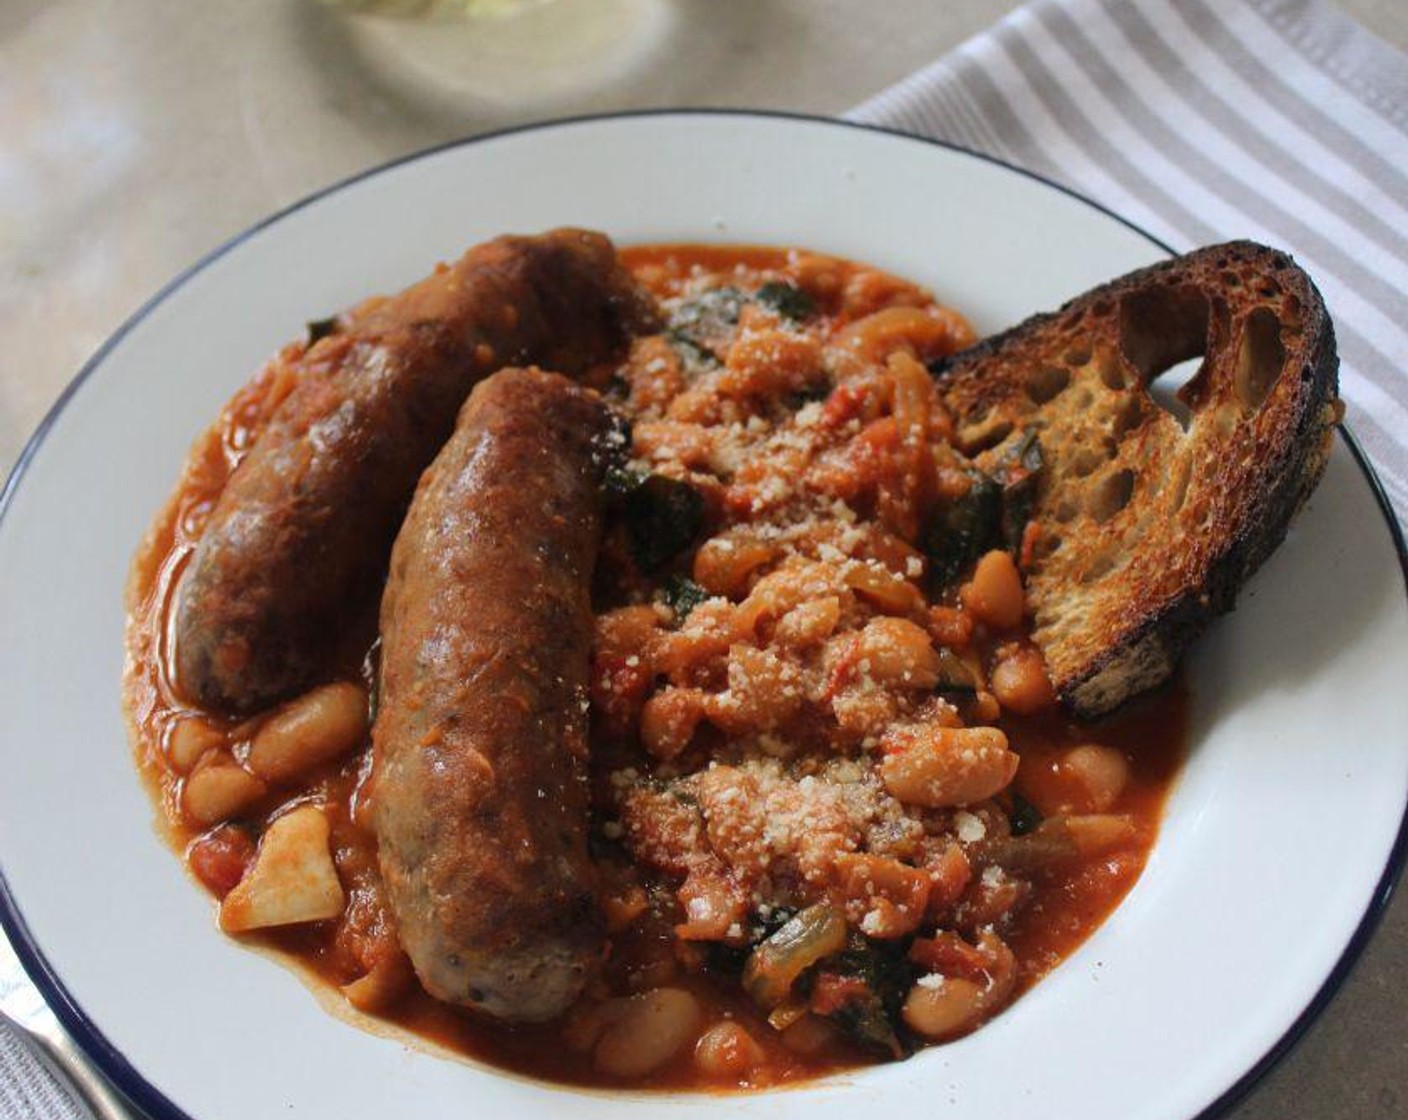 Sweet Italian Sausages with Braised White Beans and Kale